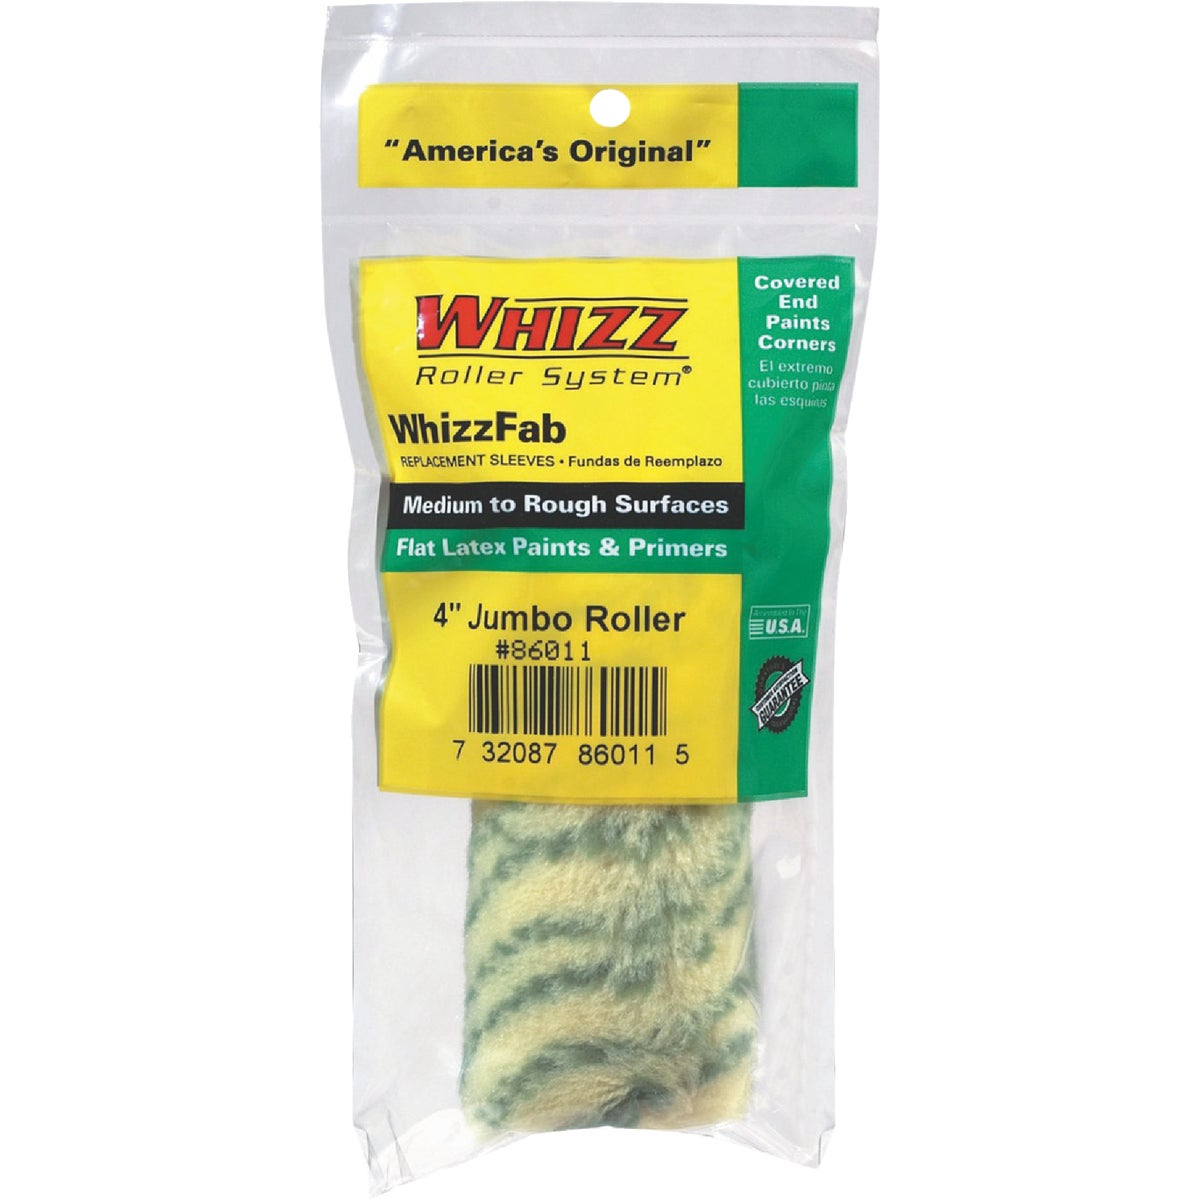 WhizzFab 4 In. x 1/2 In. Polyamide Fabric Jumbo Roller Cover